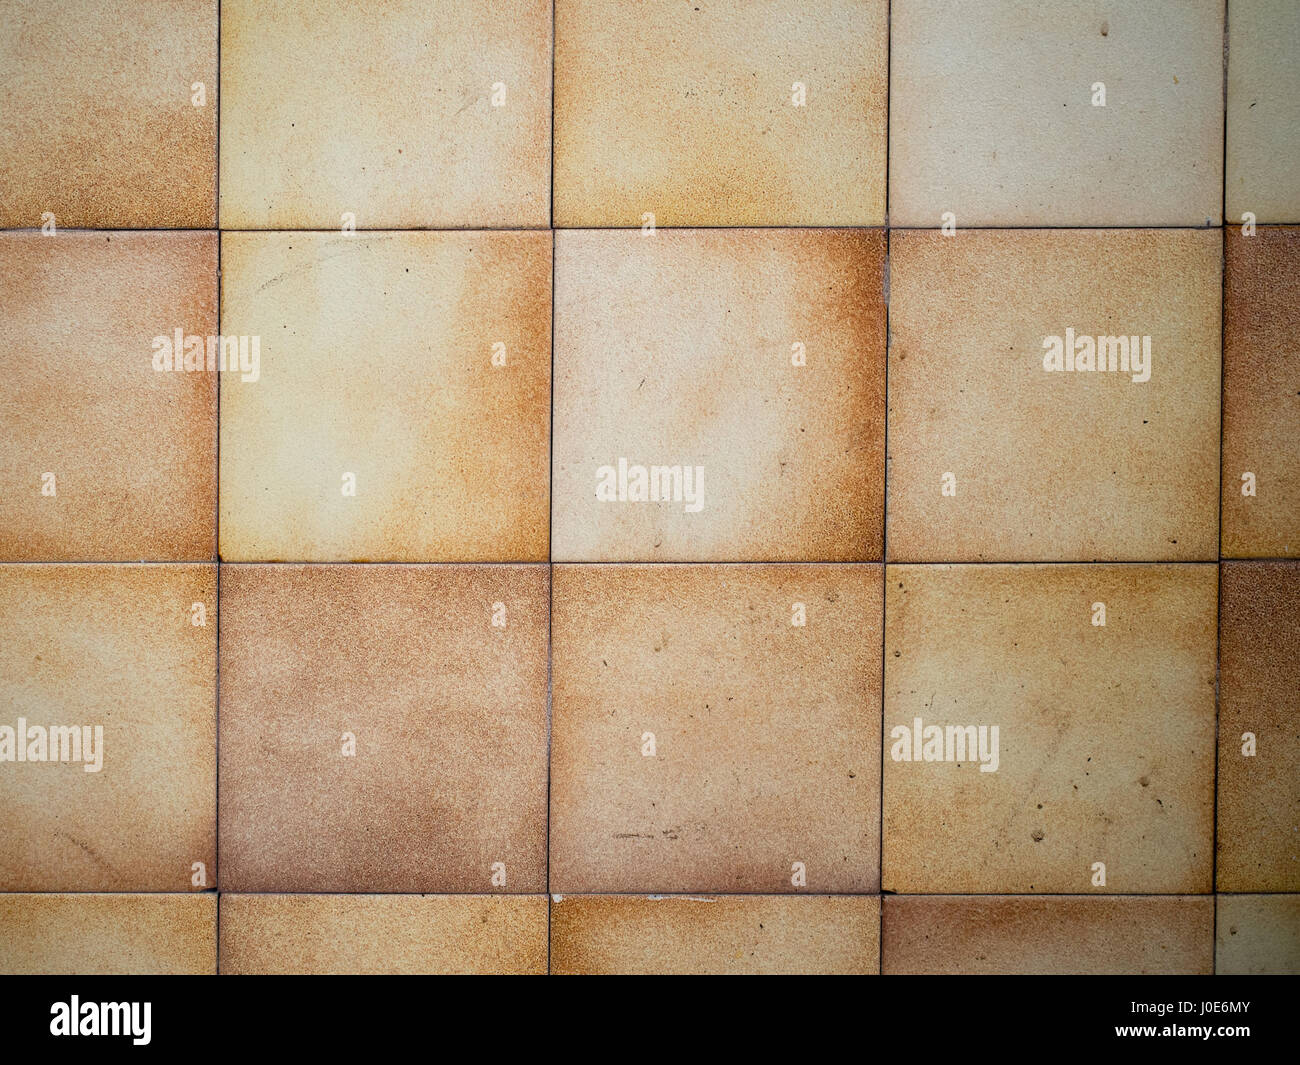 Vintage! Rather grimy old kitchen tiles without grout. Stock Photo